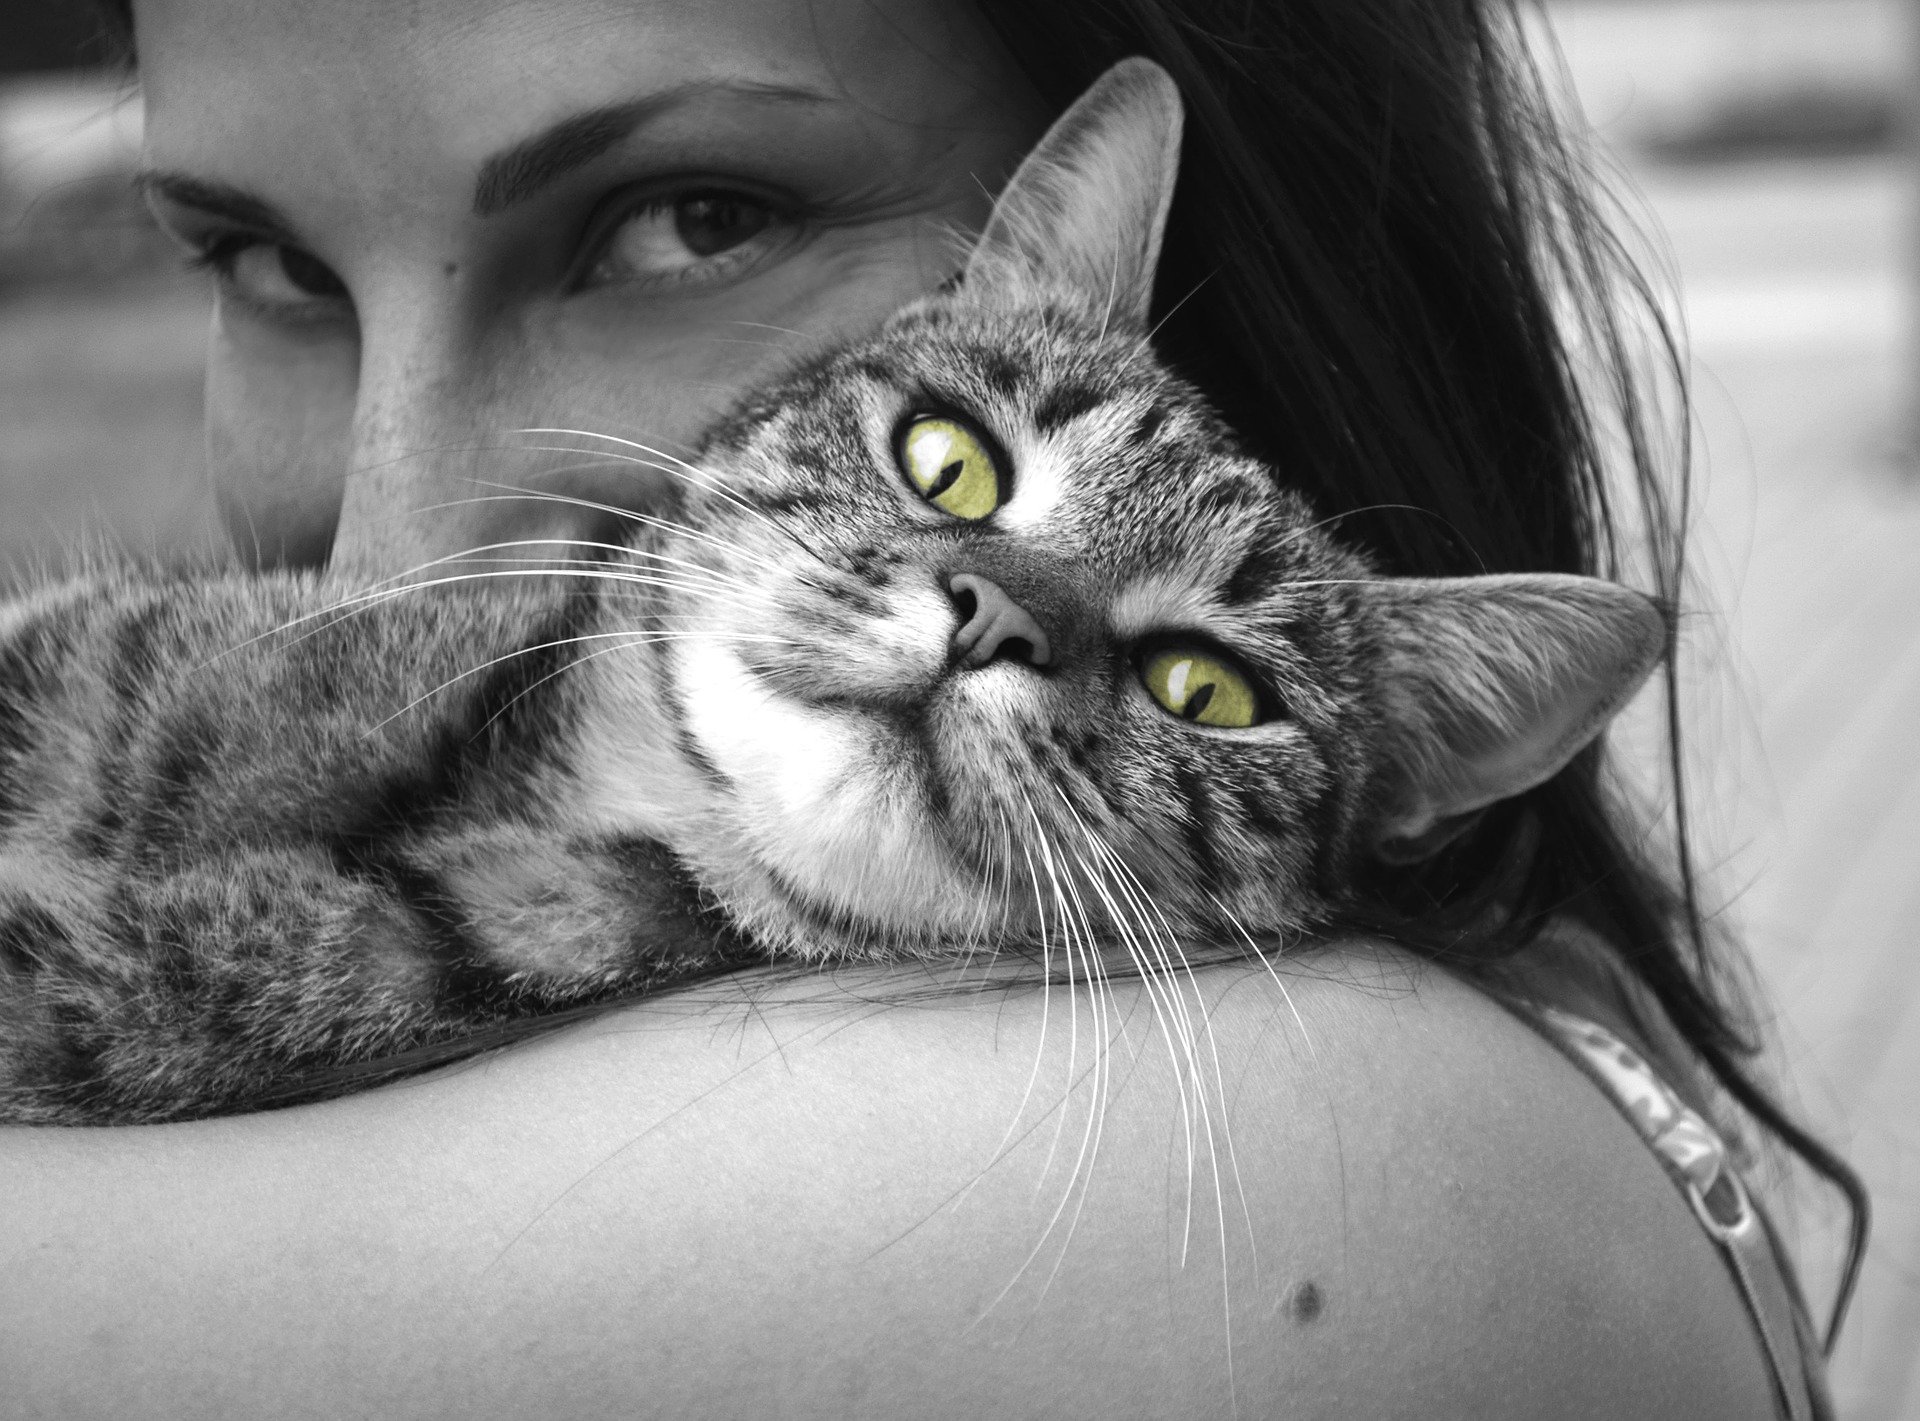 woman hugging cat - 8 ways animals are part of the family